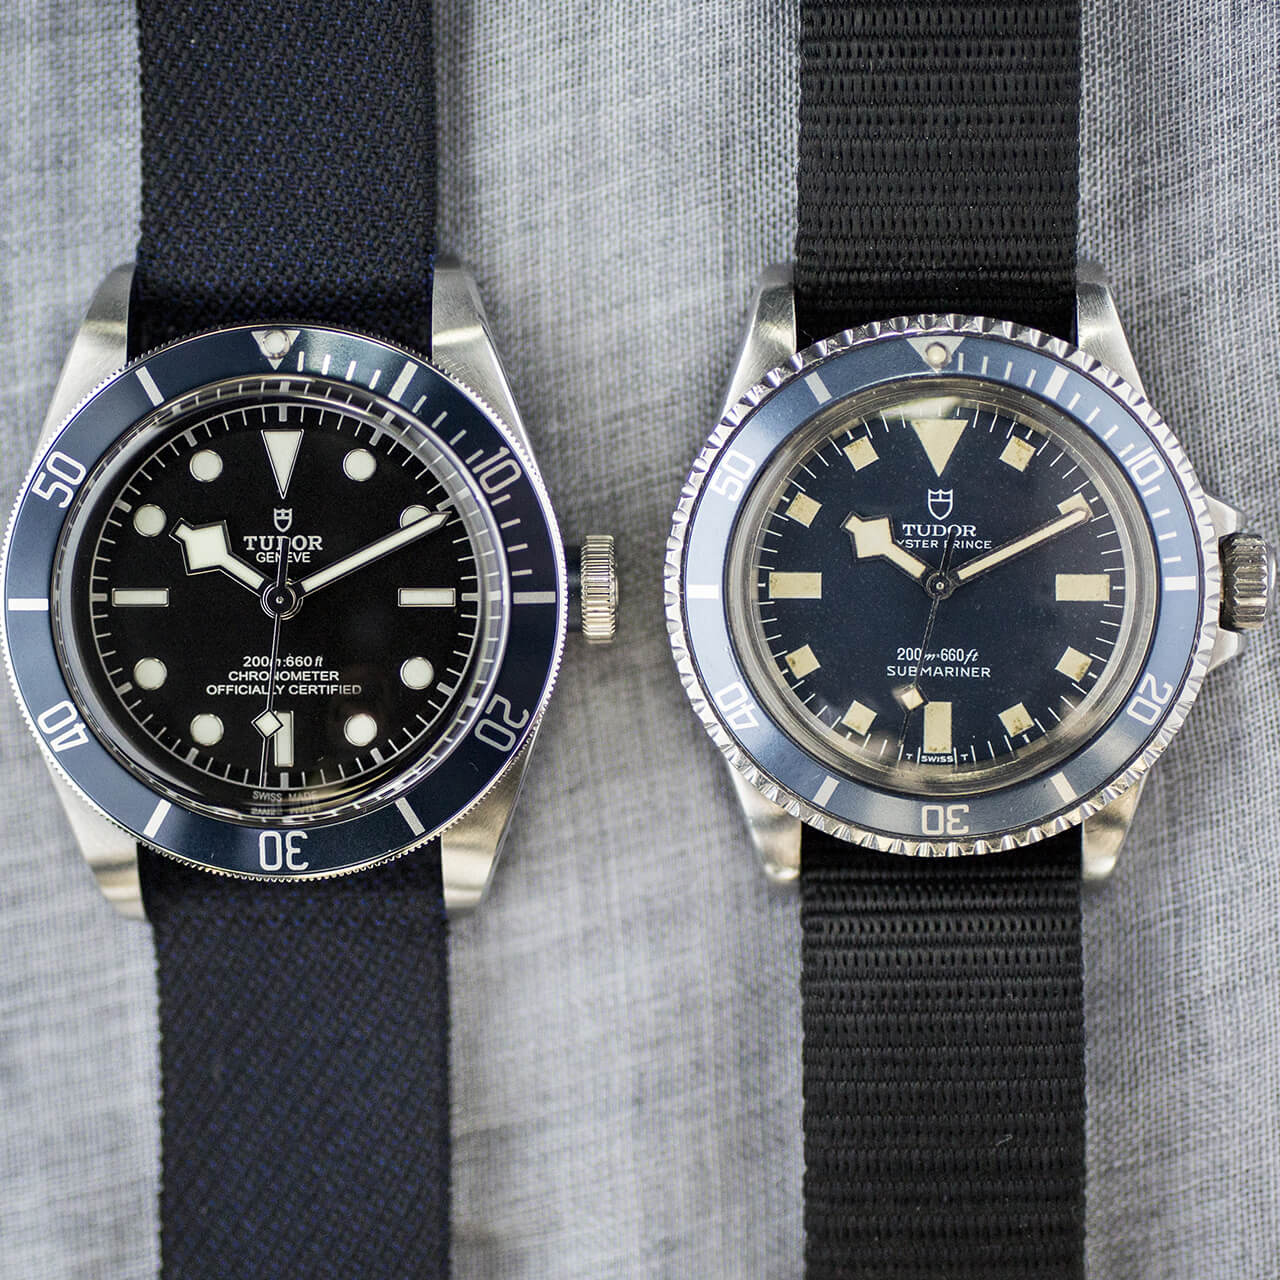 A couple of watches on a cloth surface.